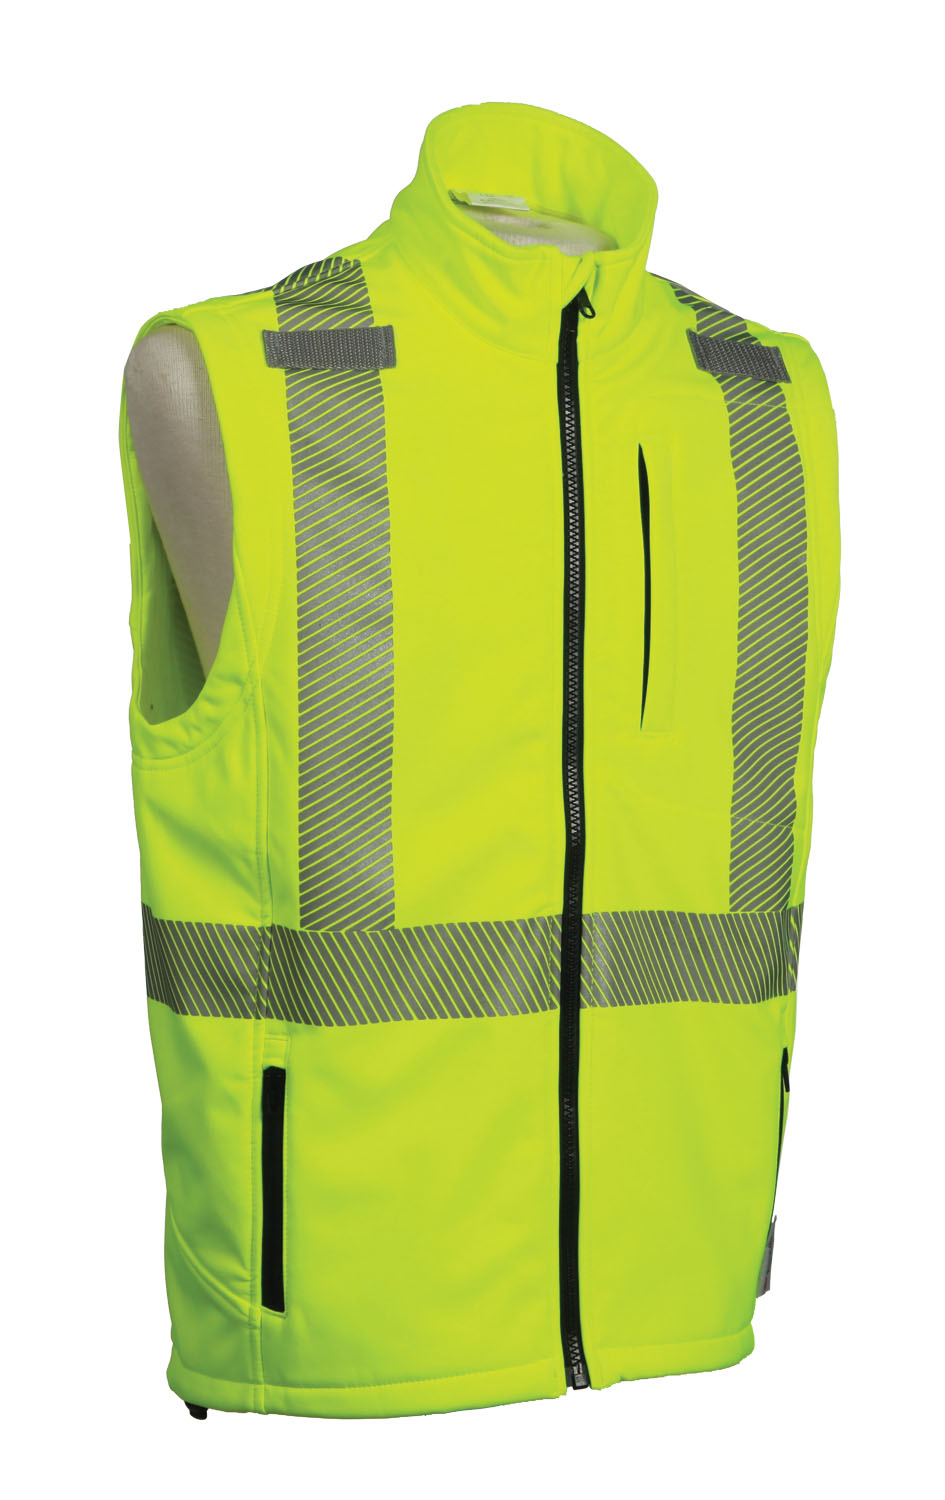 Water Resistant Breathable Softshell Sleeveless Jacket/Vest Liner for Parka